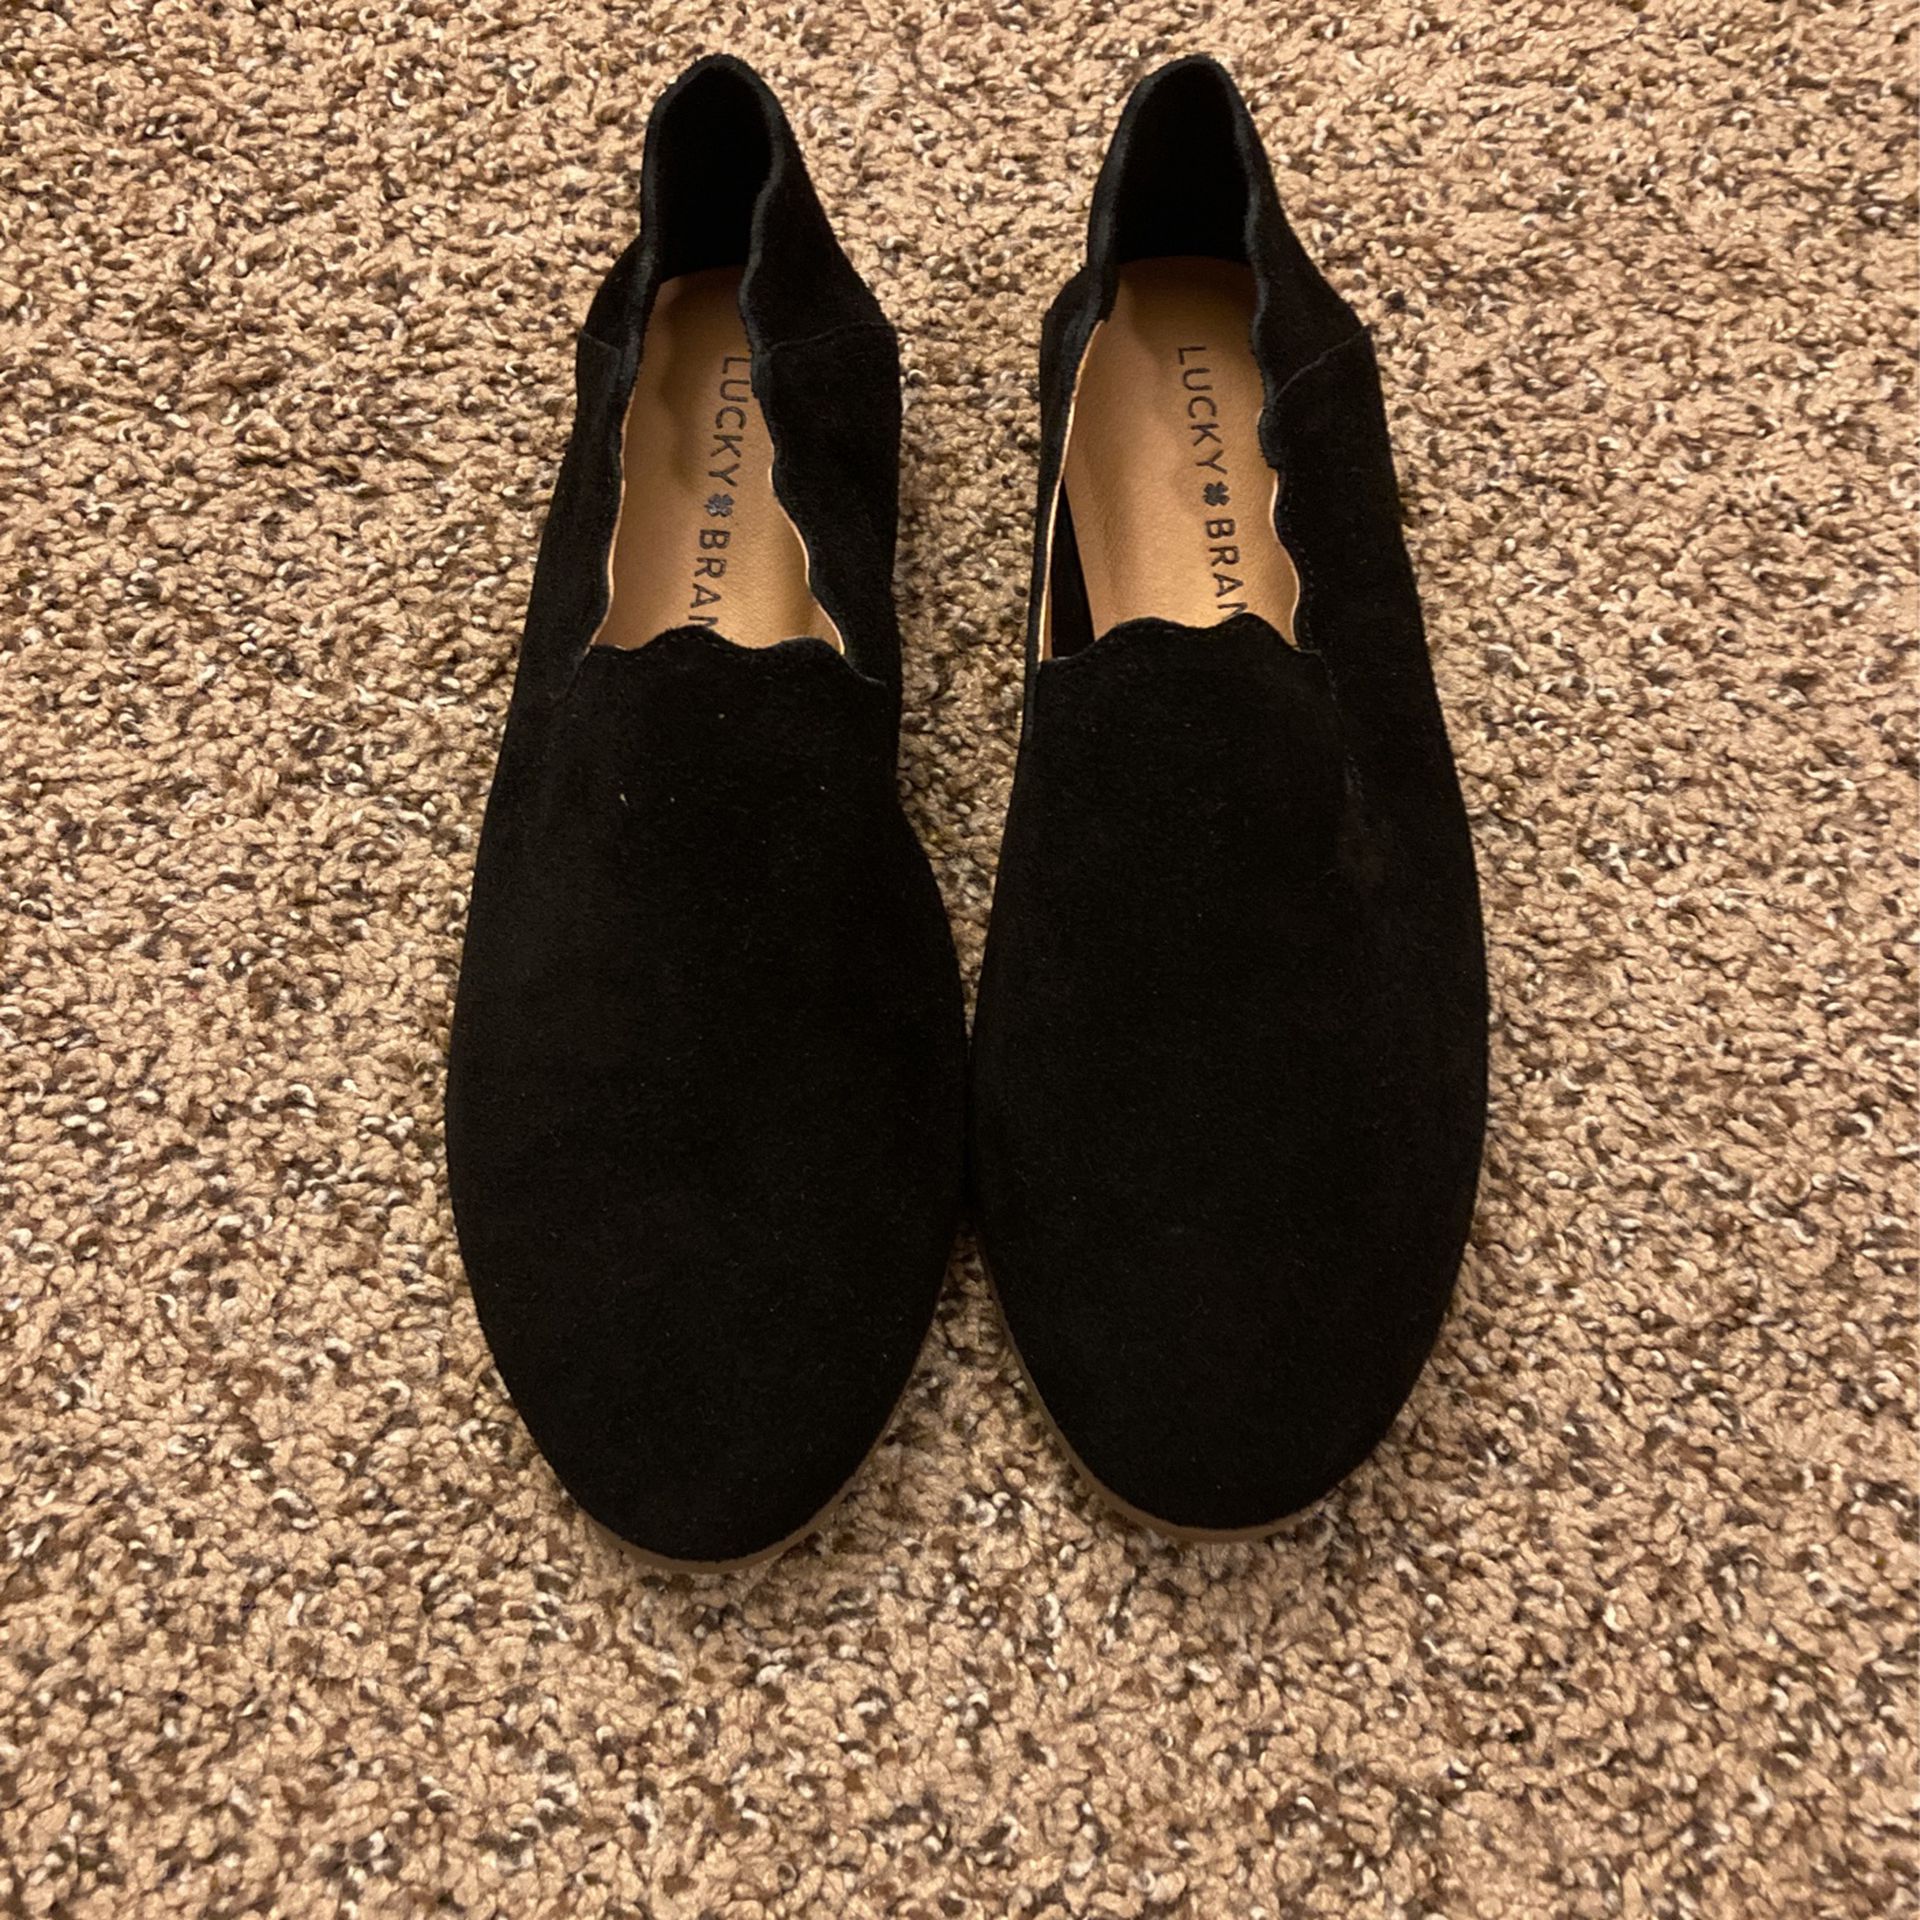 Lucky Brand Black Suede Flats - Brand New